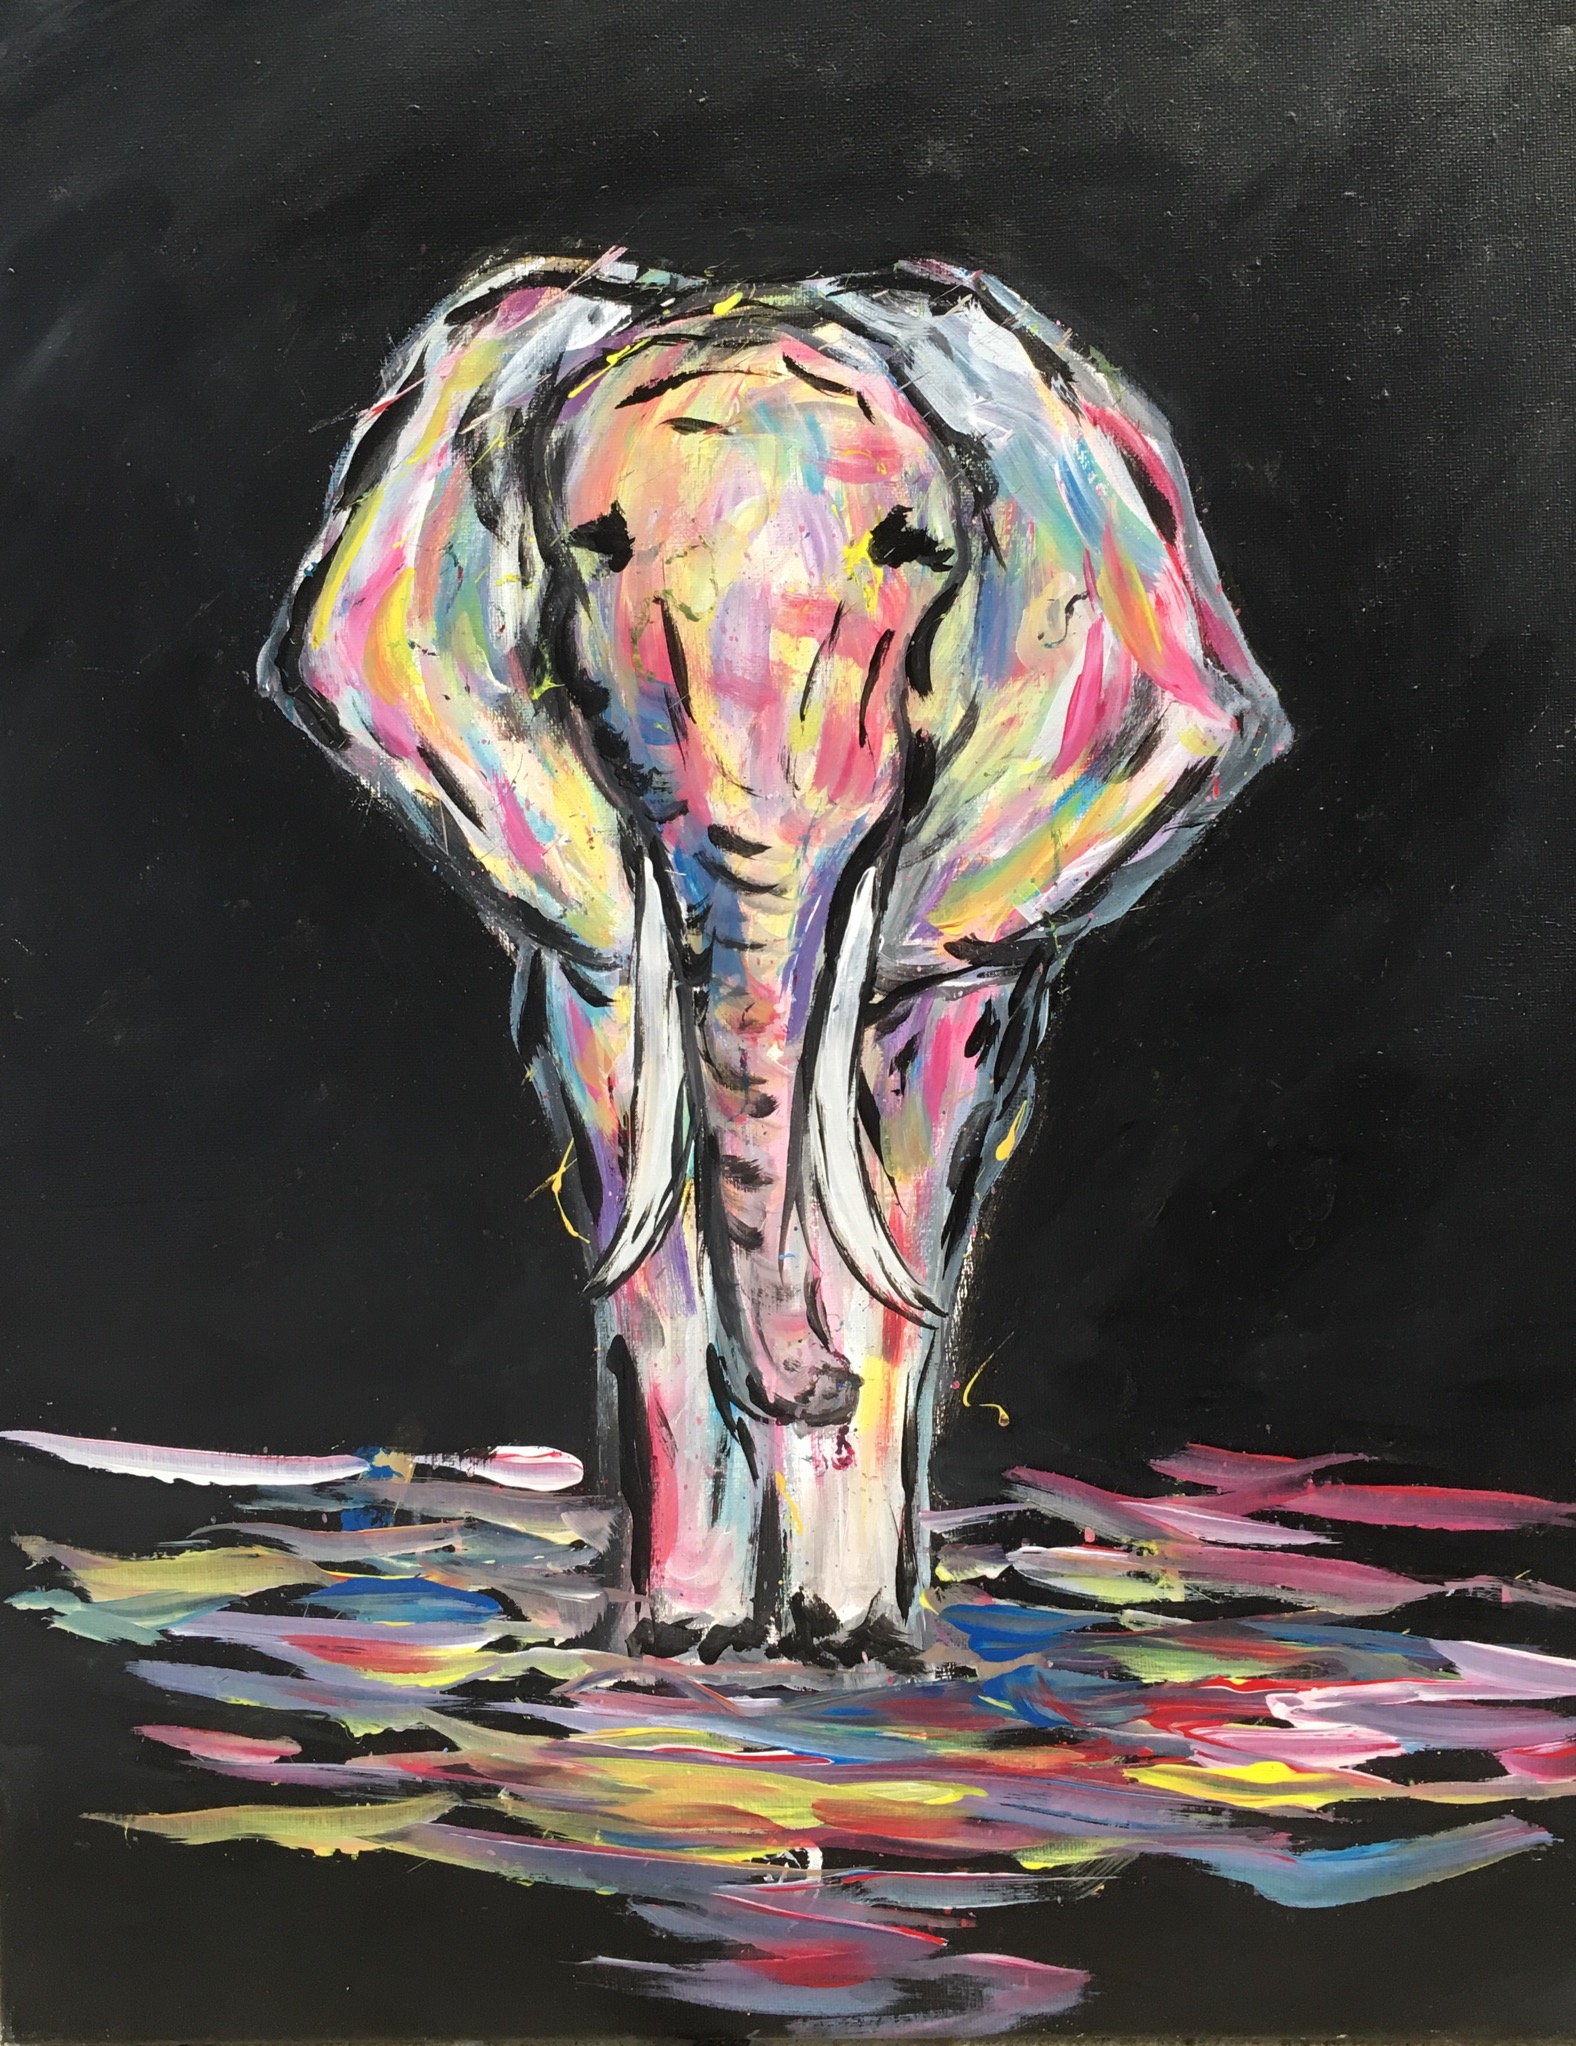 A Tie Dye Elephant experience project by Yaymaker